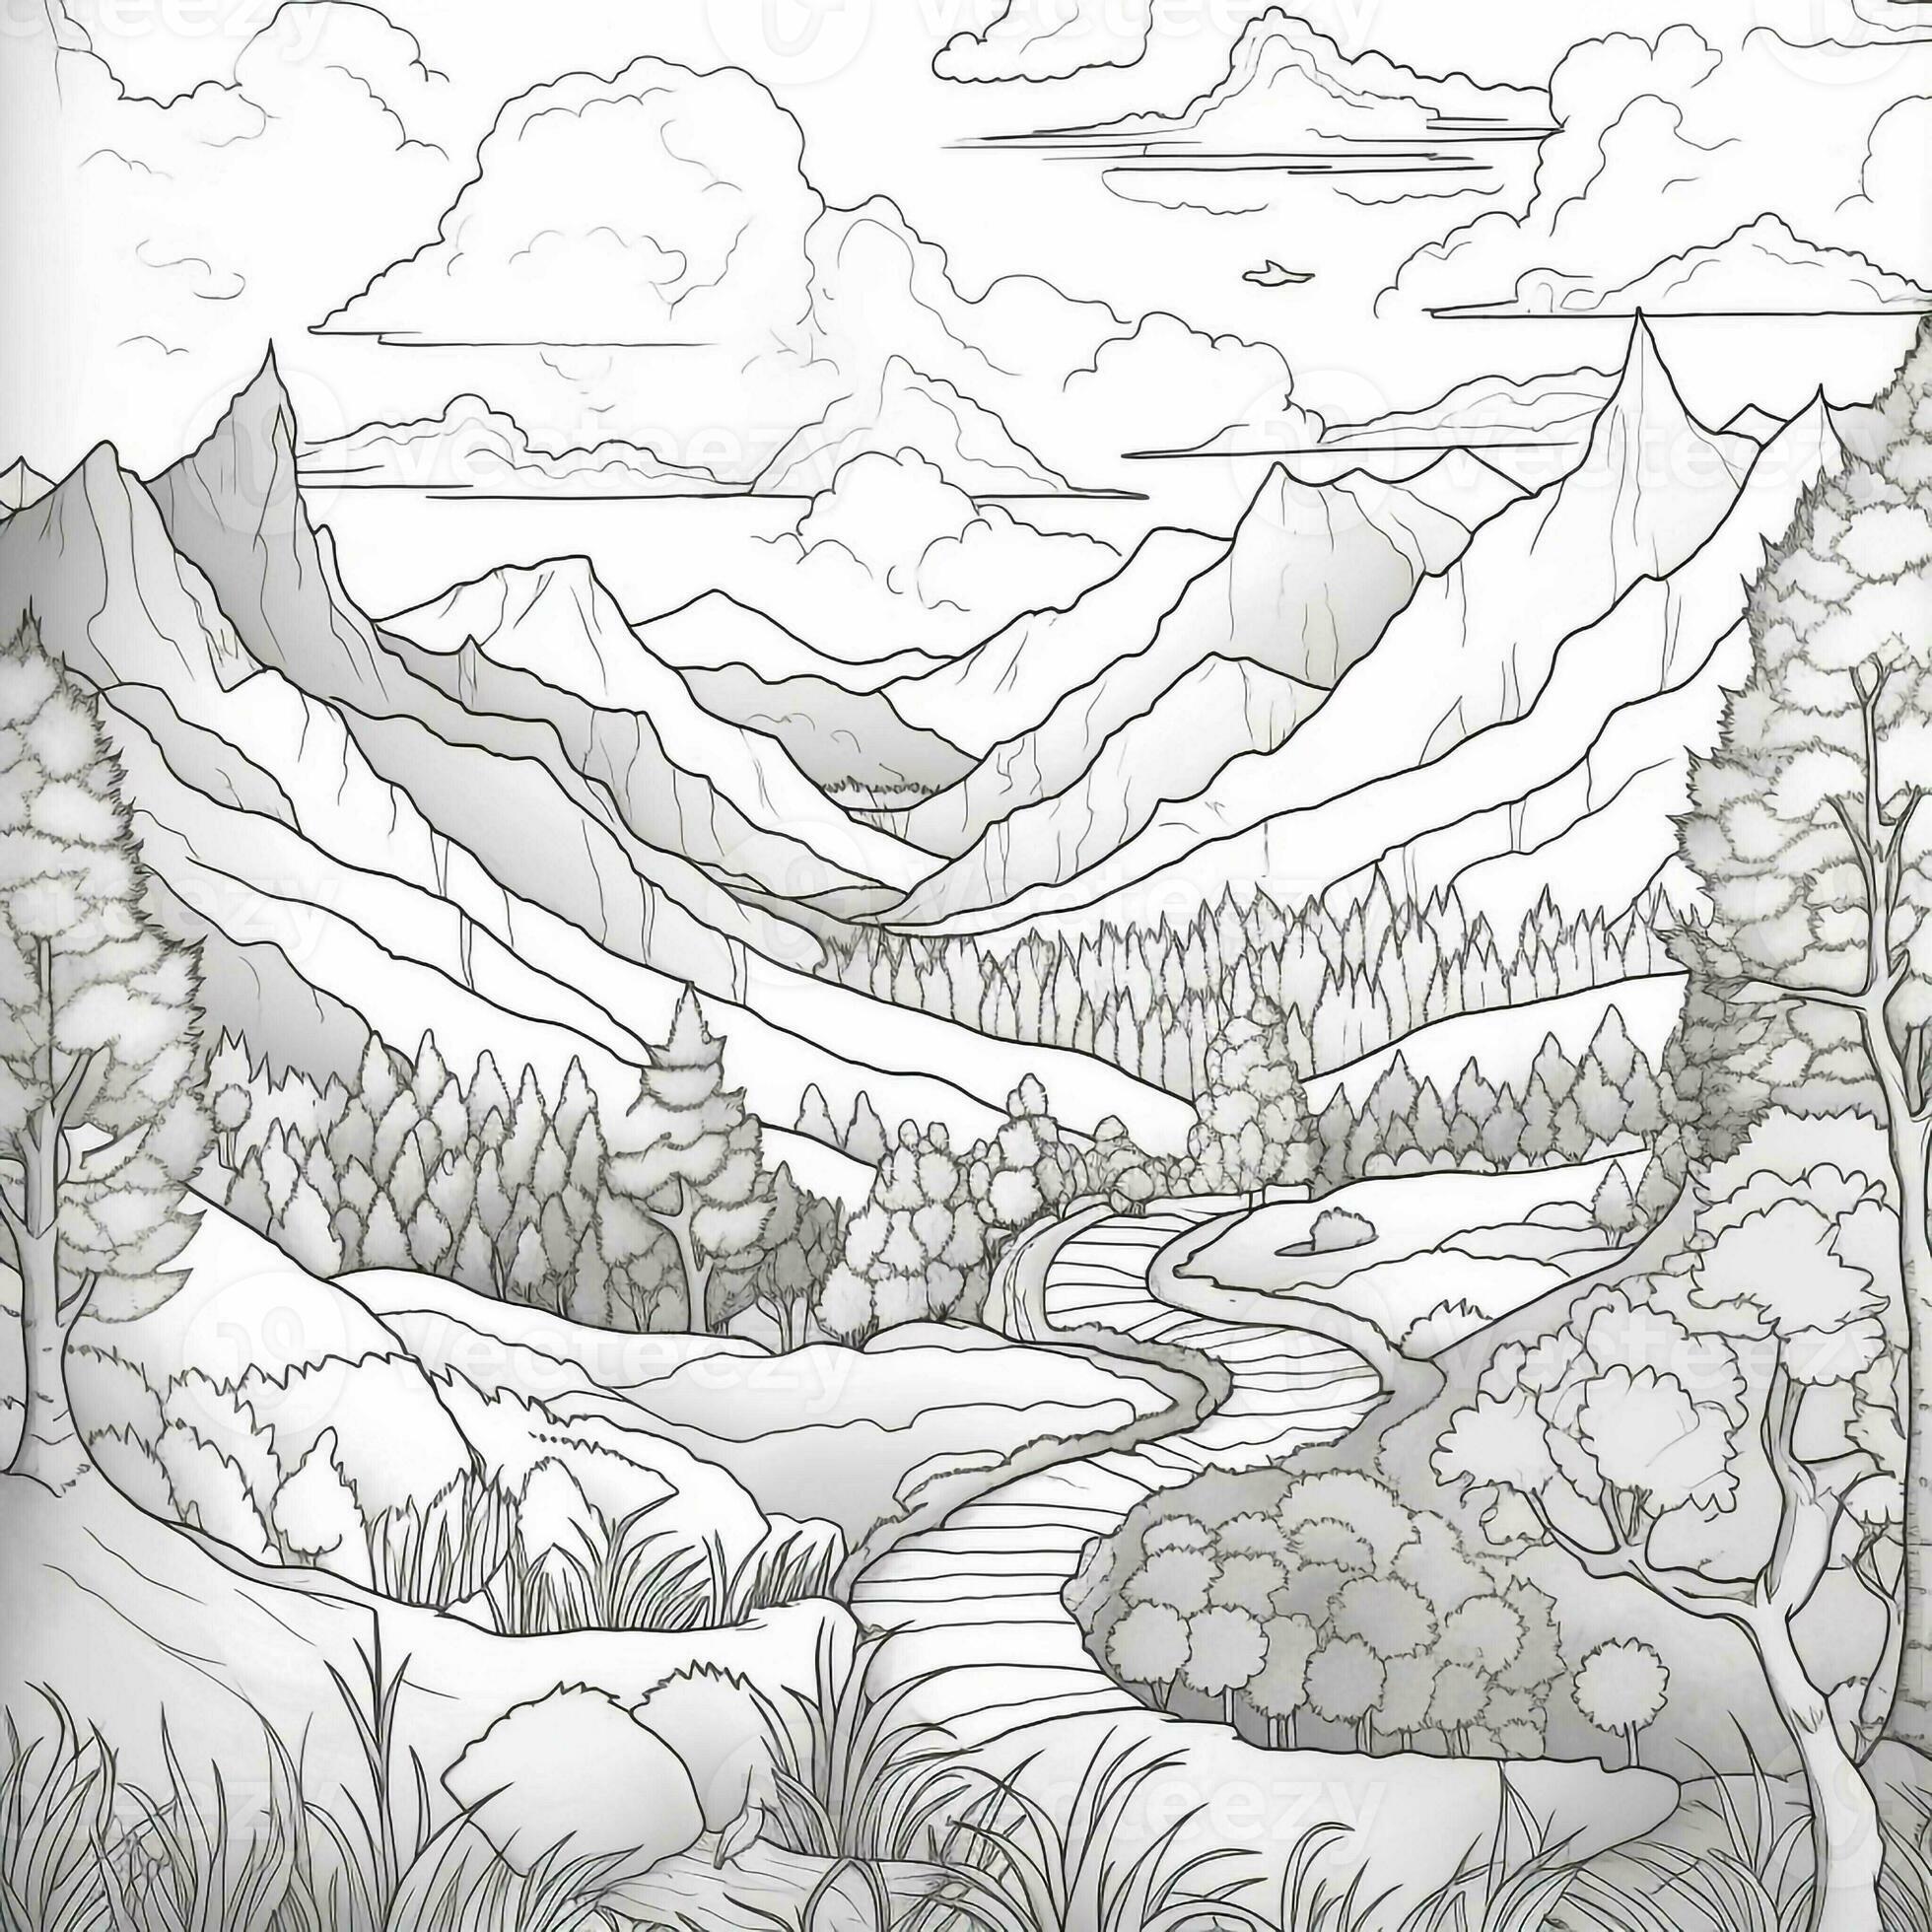 Drawing a Manga Forest Landscape - Pencil - YouTube